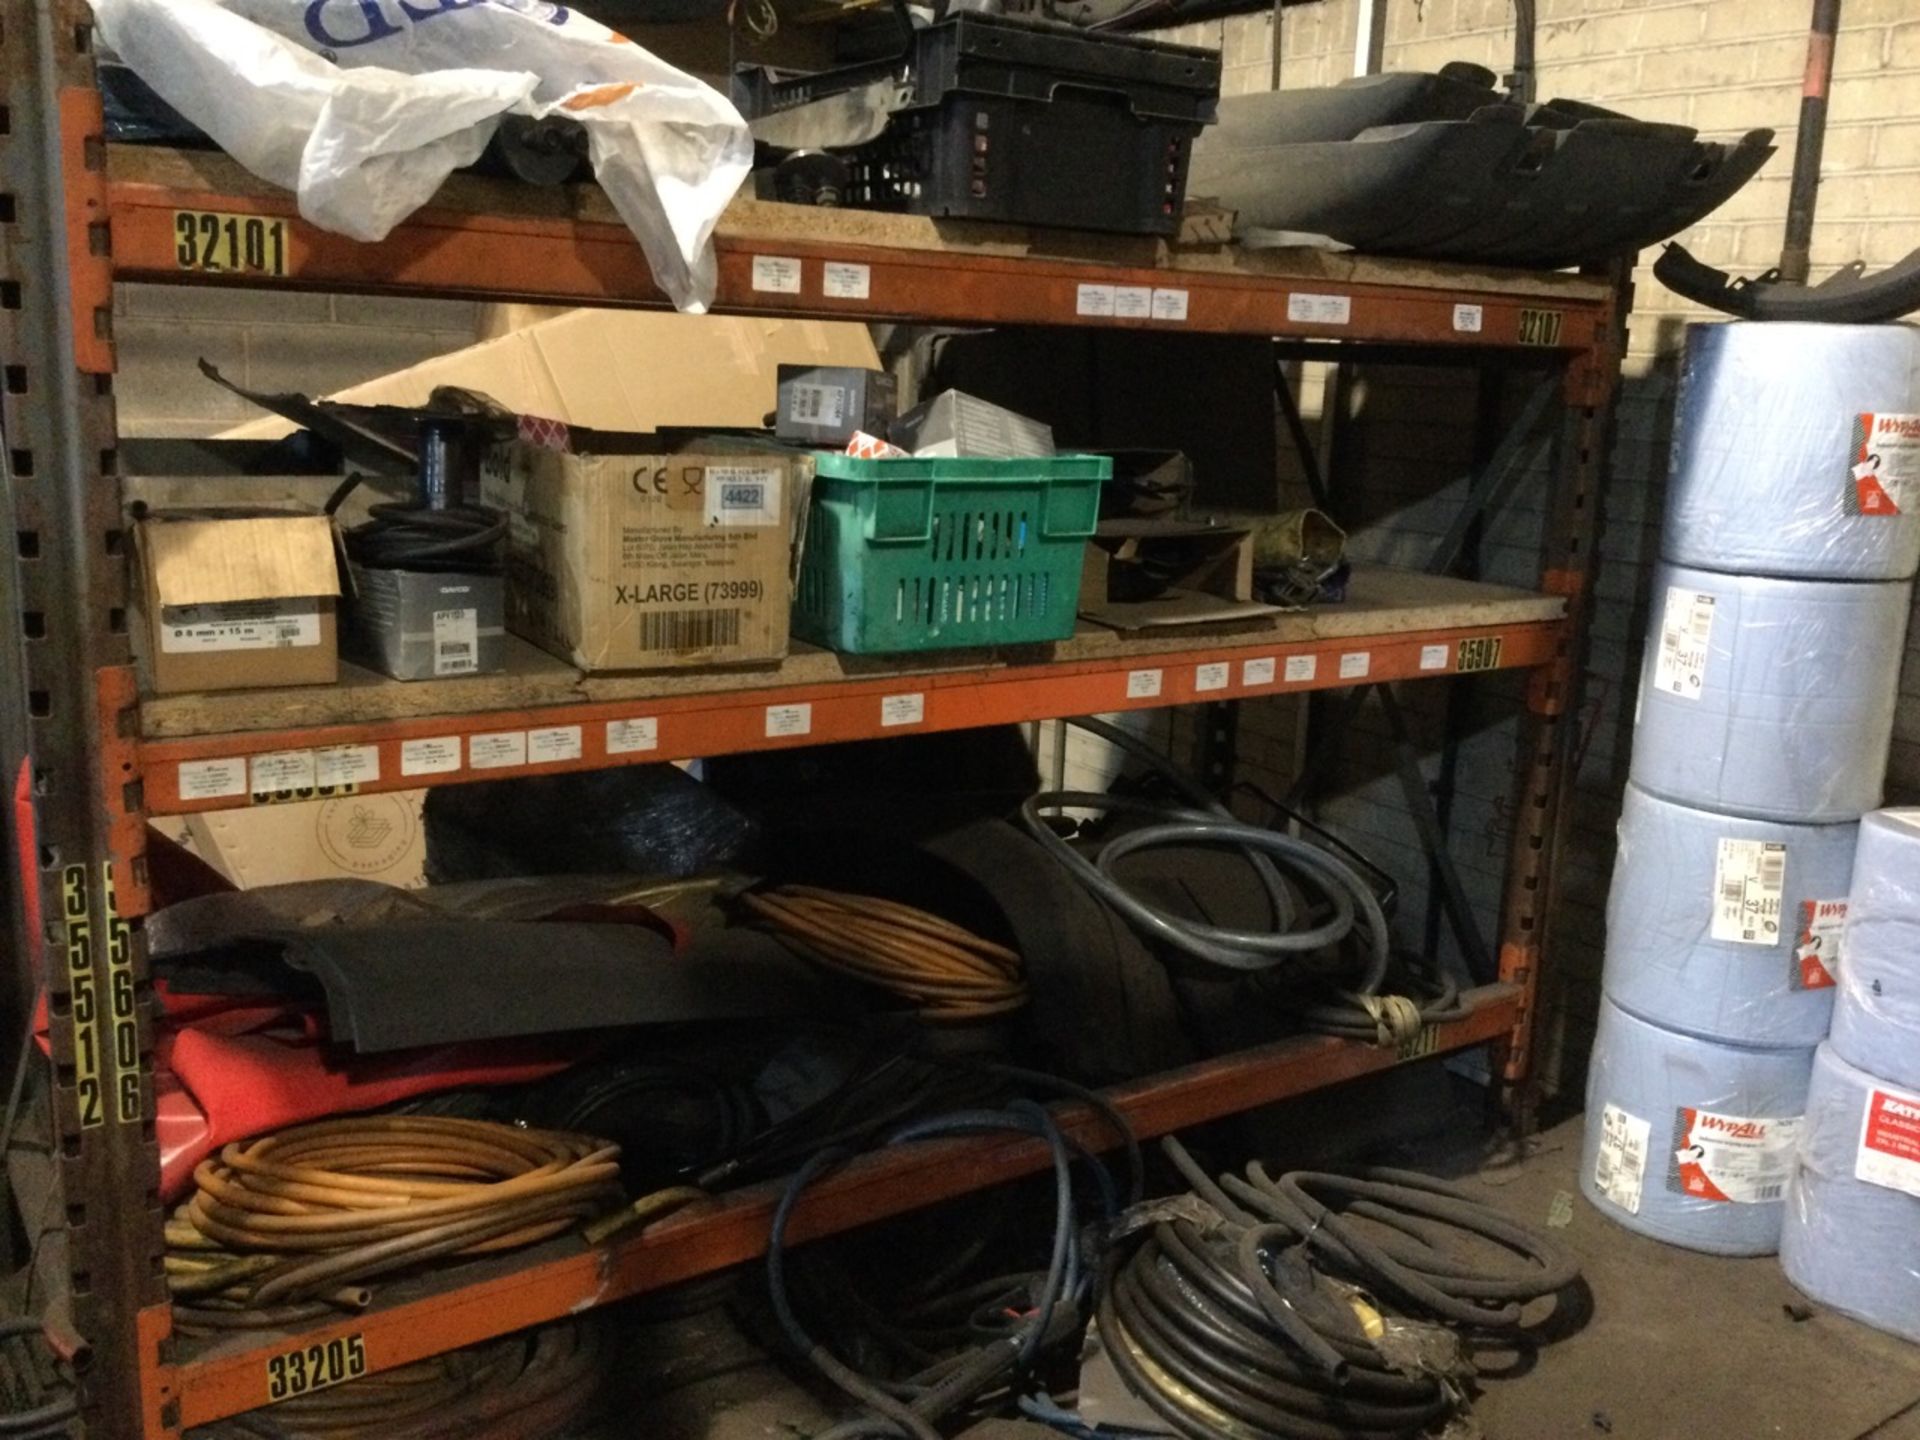 Complete Contents Of Mezzanine Floor Containing Parts, Inventory, Shelving Units Etc. - Image 6 of 9